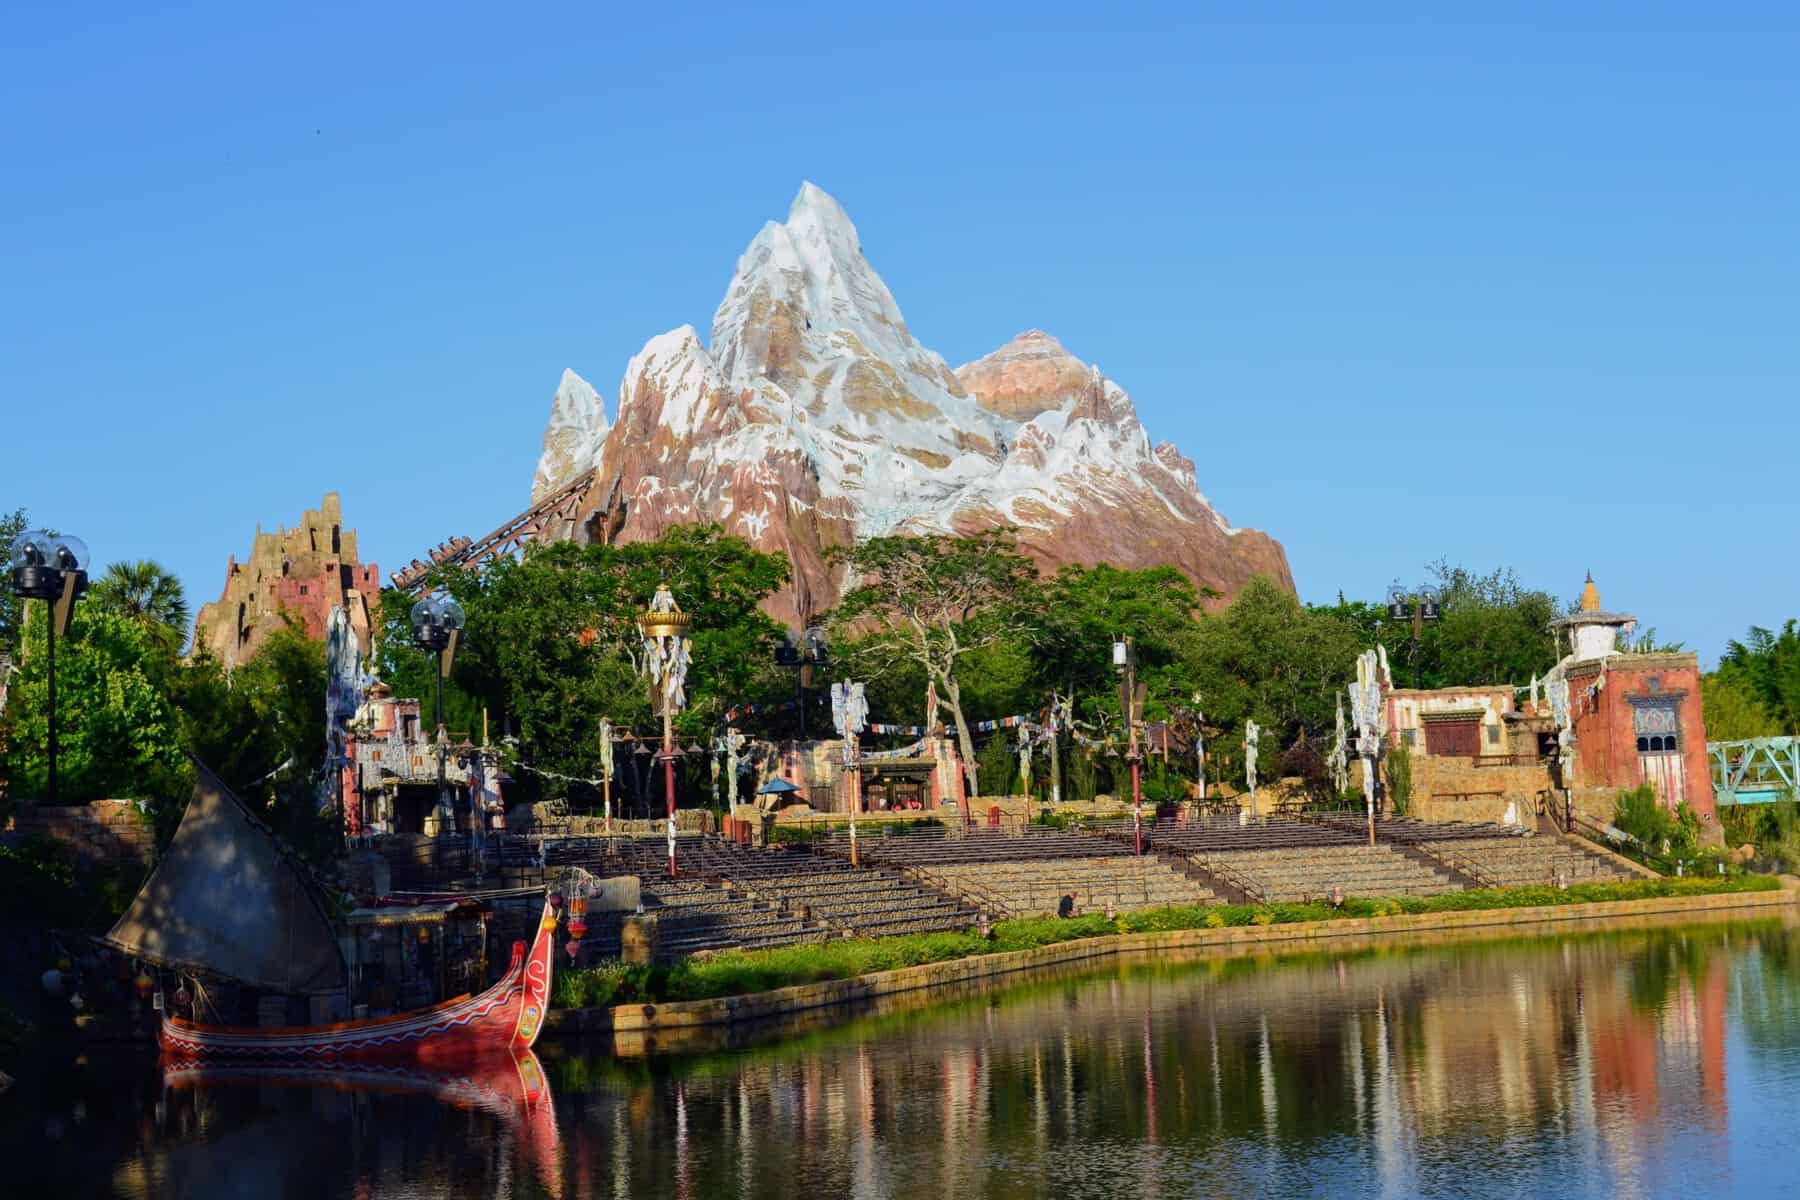 Guide to Every Attraction at Disney World’s Animal Kingdom